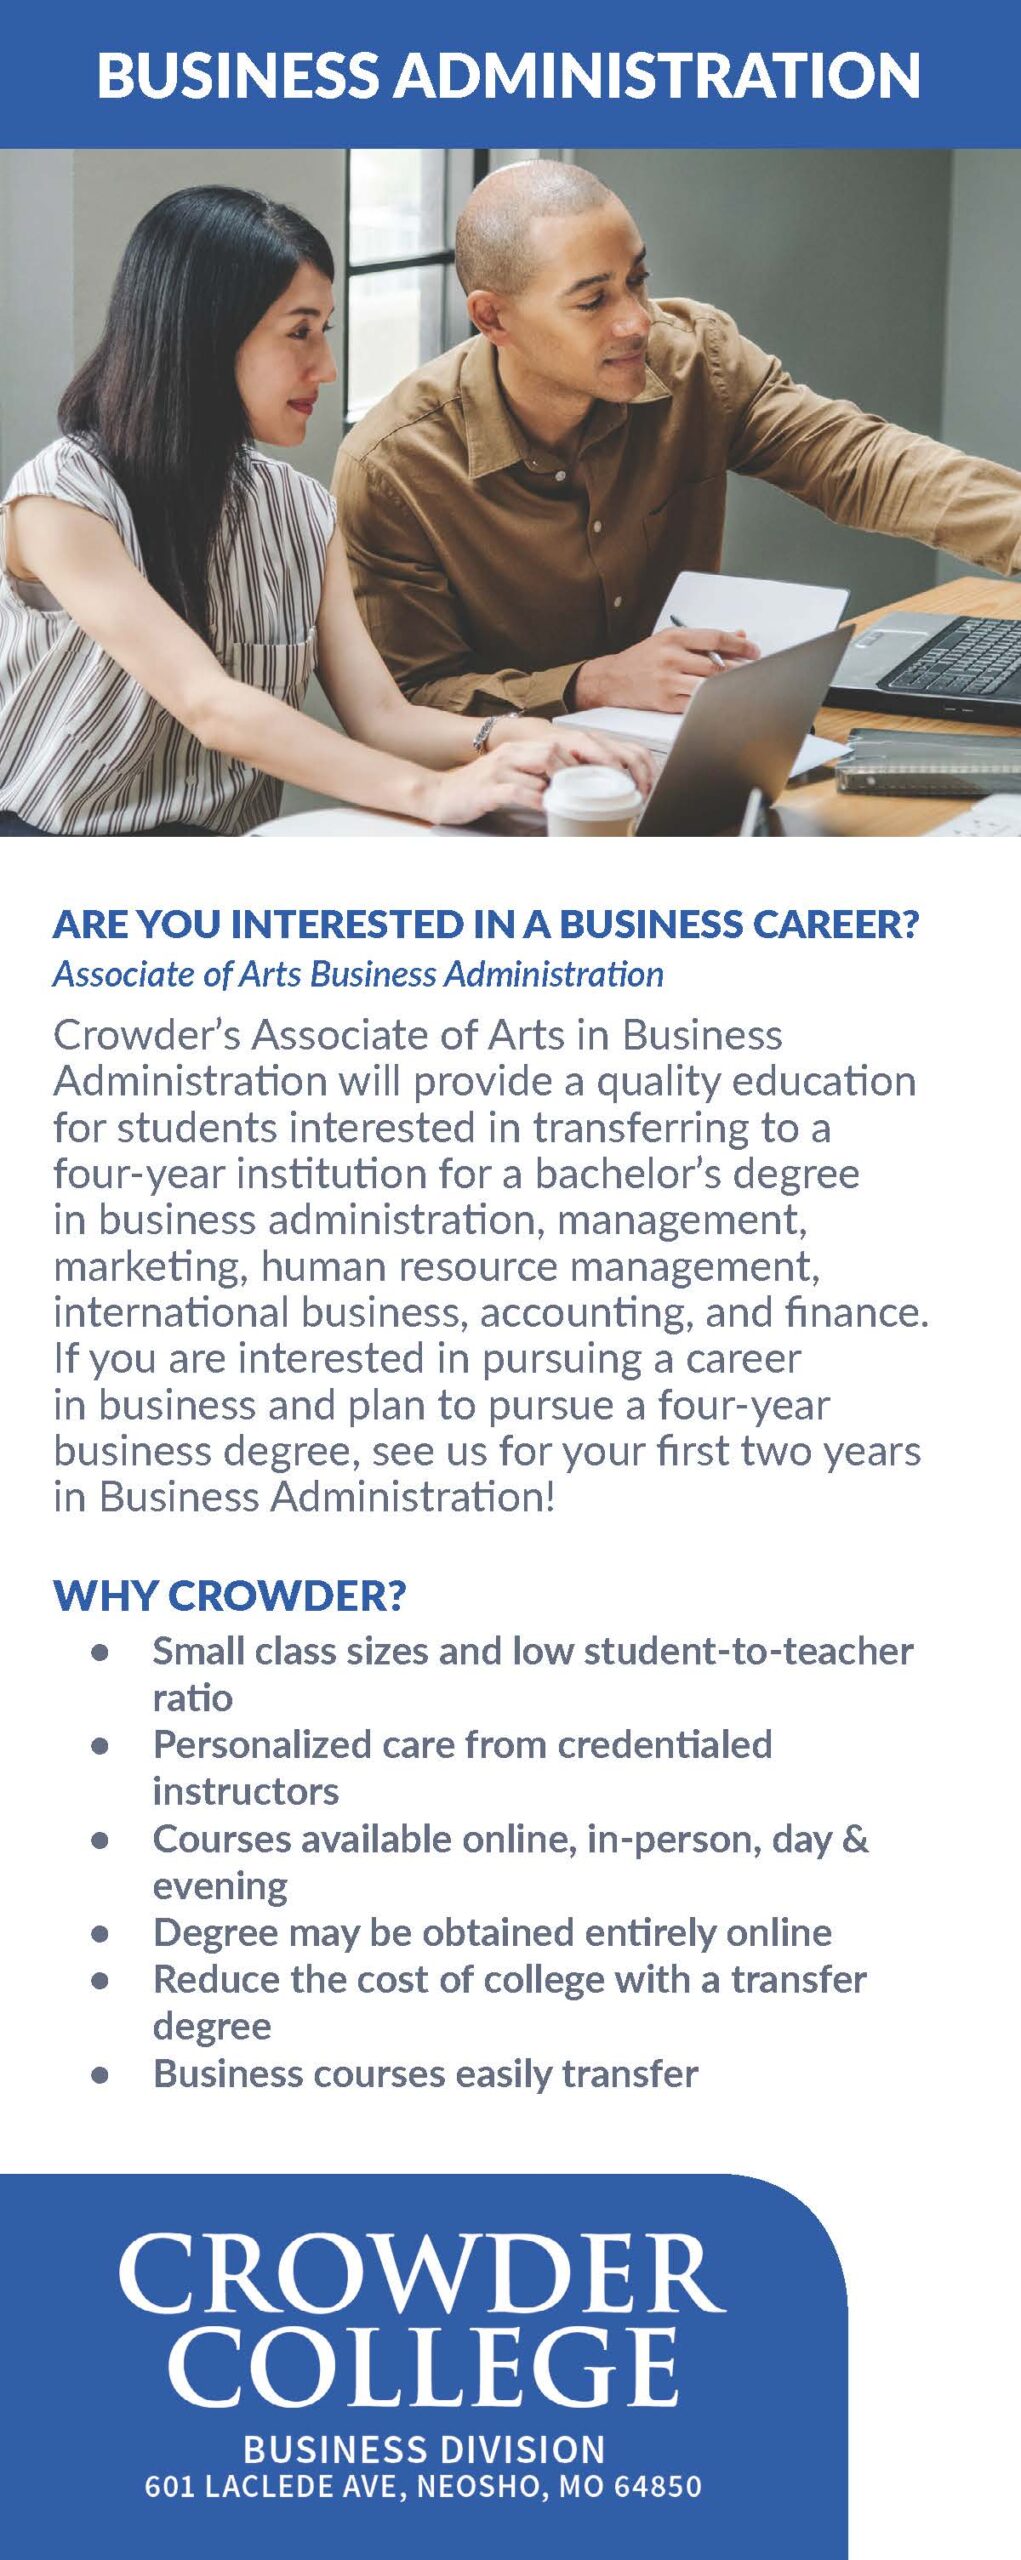 Business administration program at Crowder College